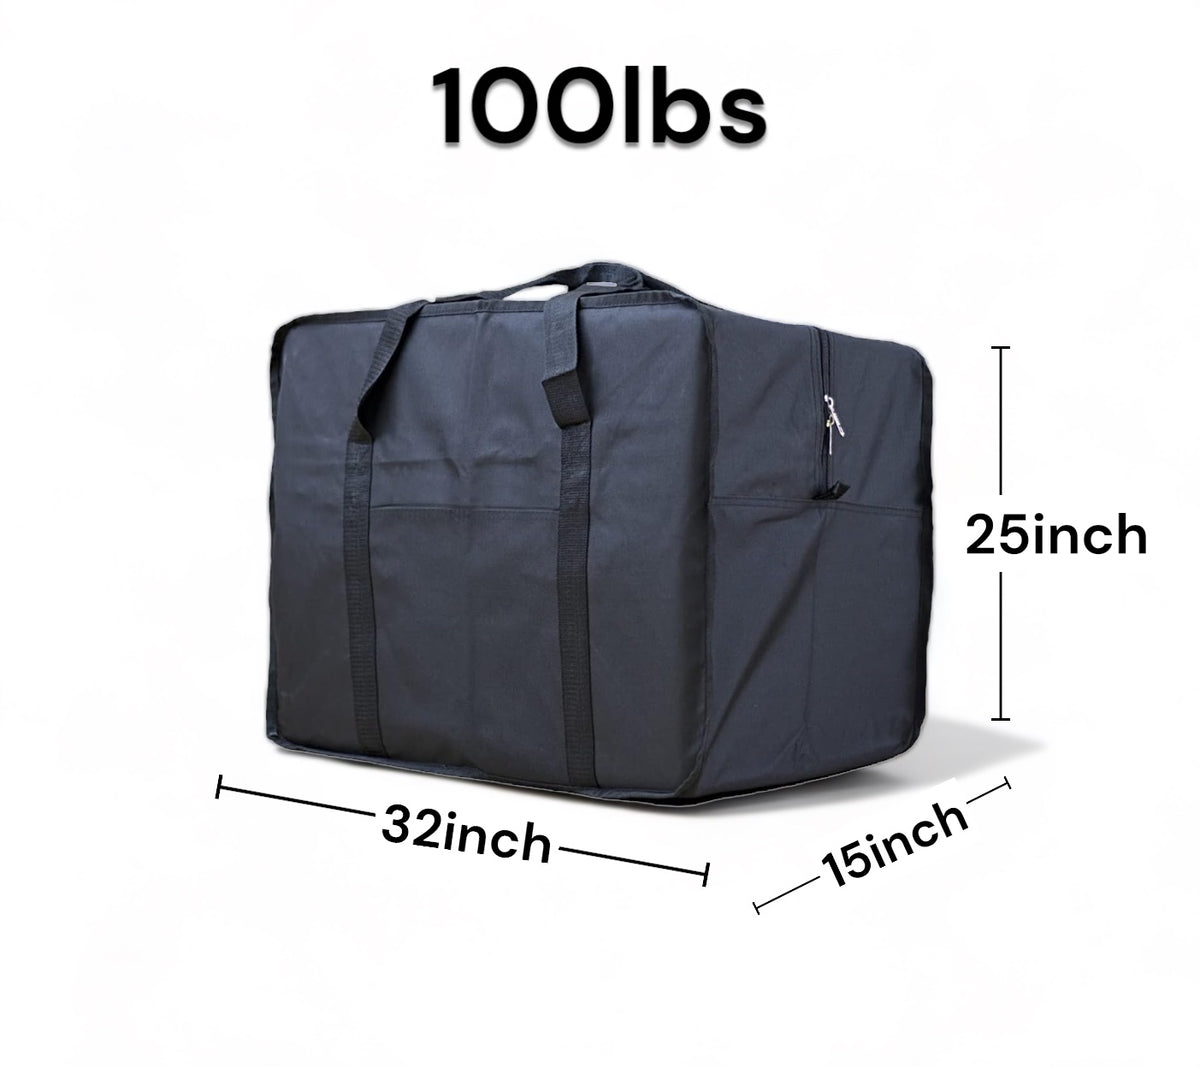 Travel Duffle Bags for 100lbs Available in Black